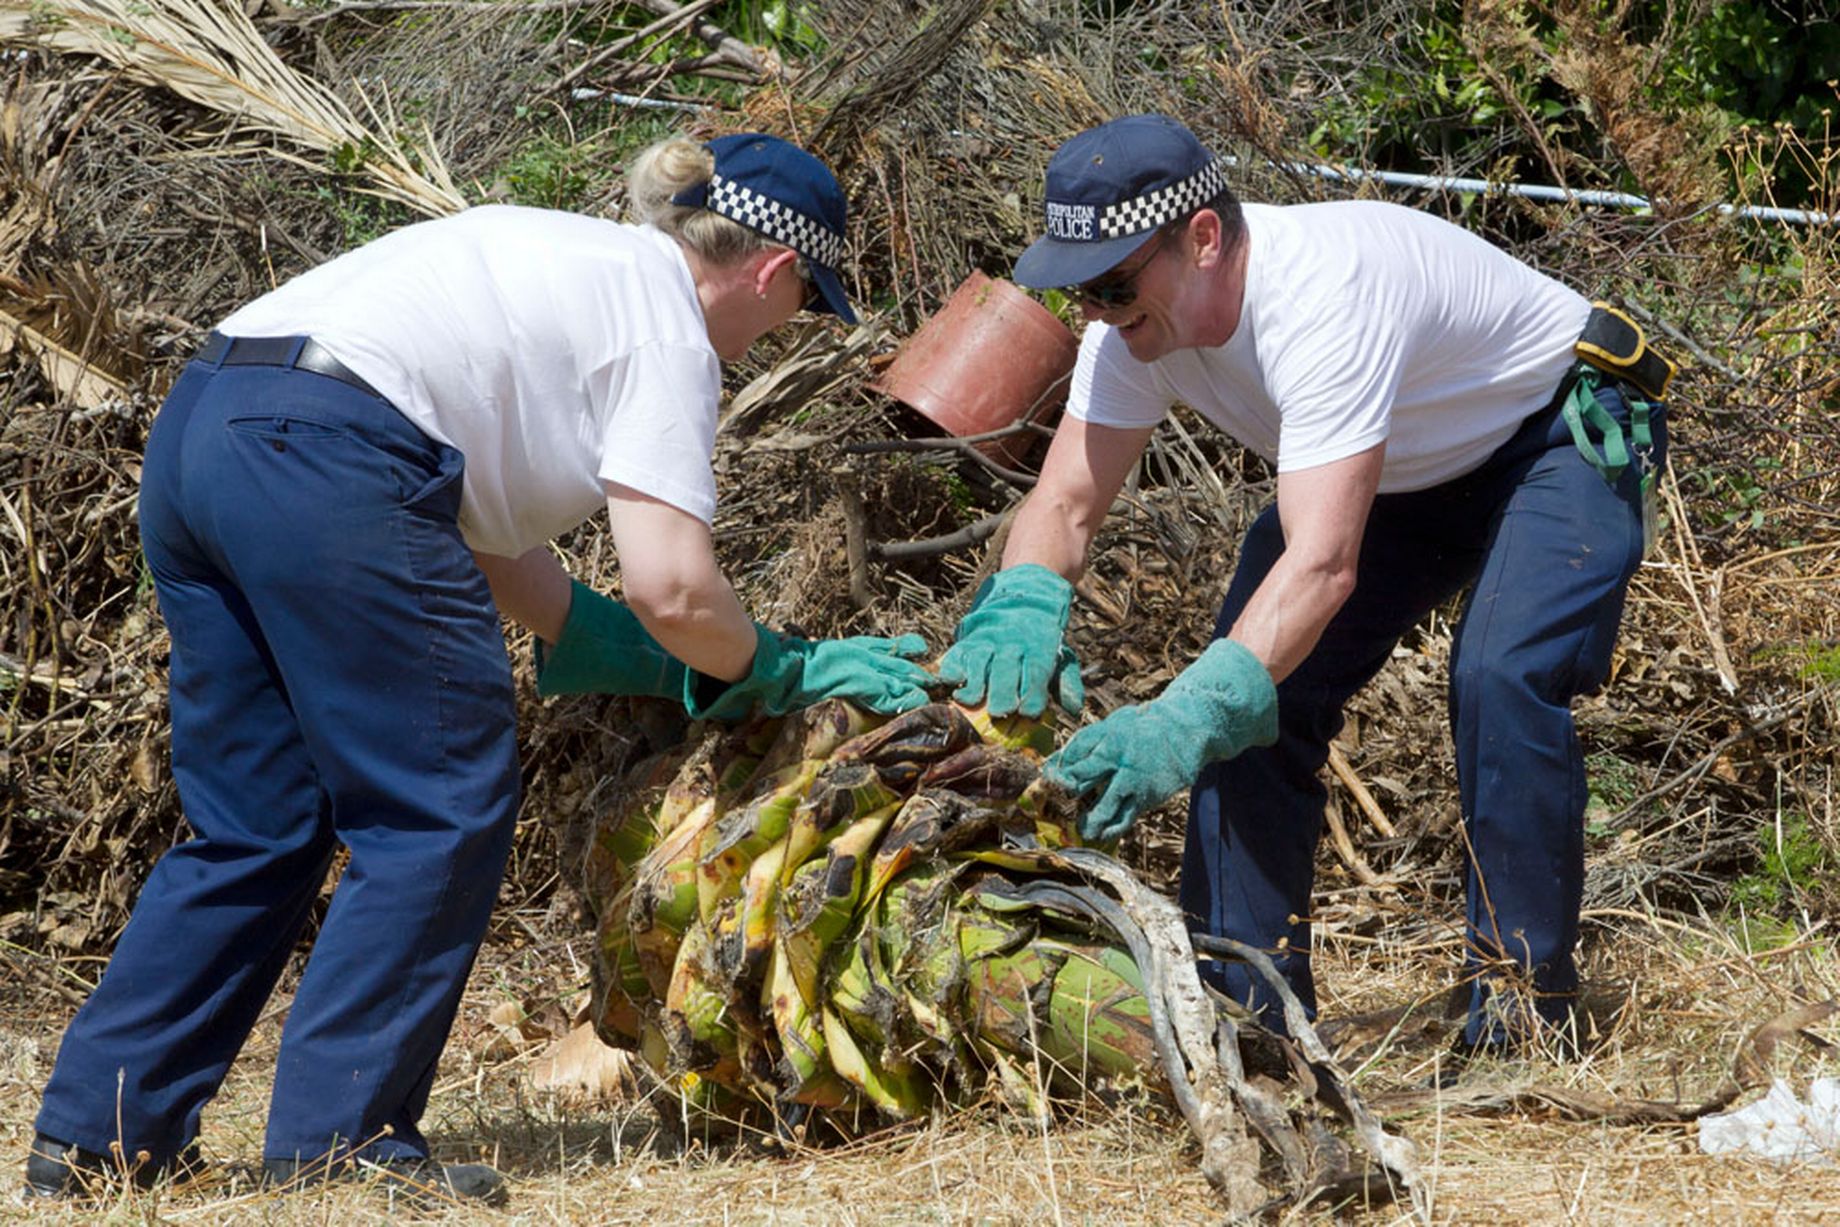 British police officers search the grounds in Praia da Luz in the hope of finding clues